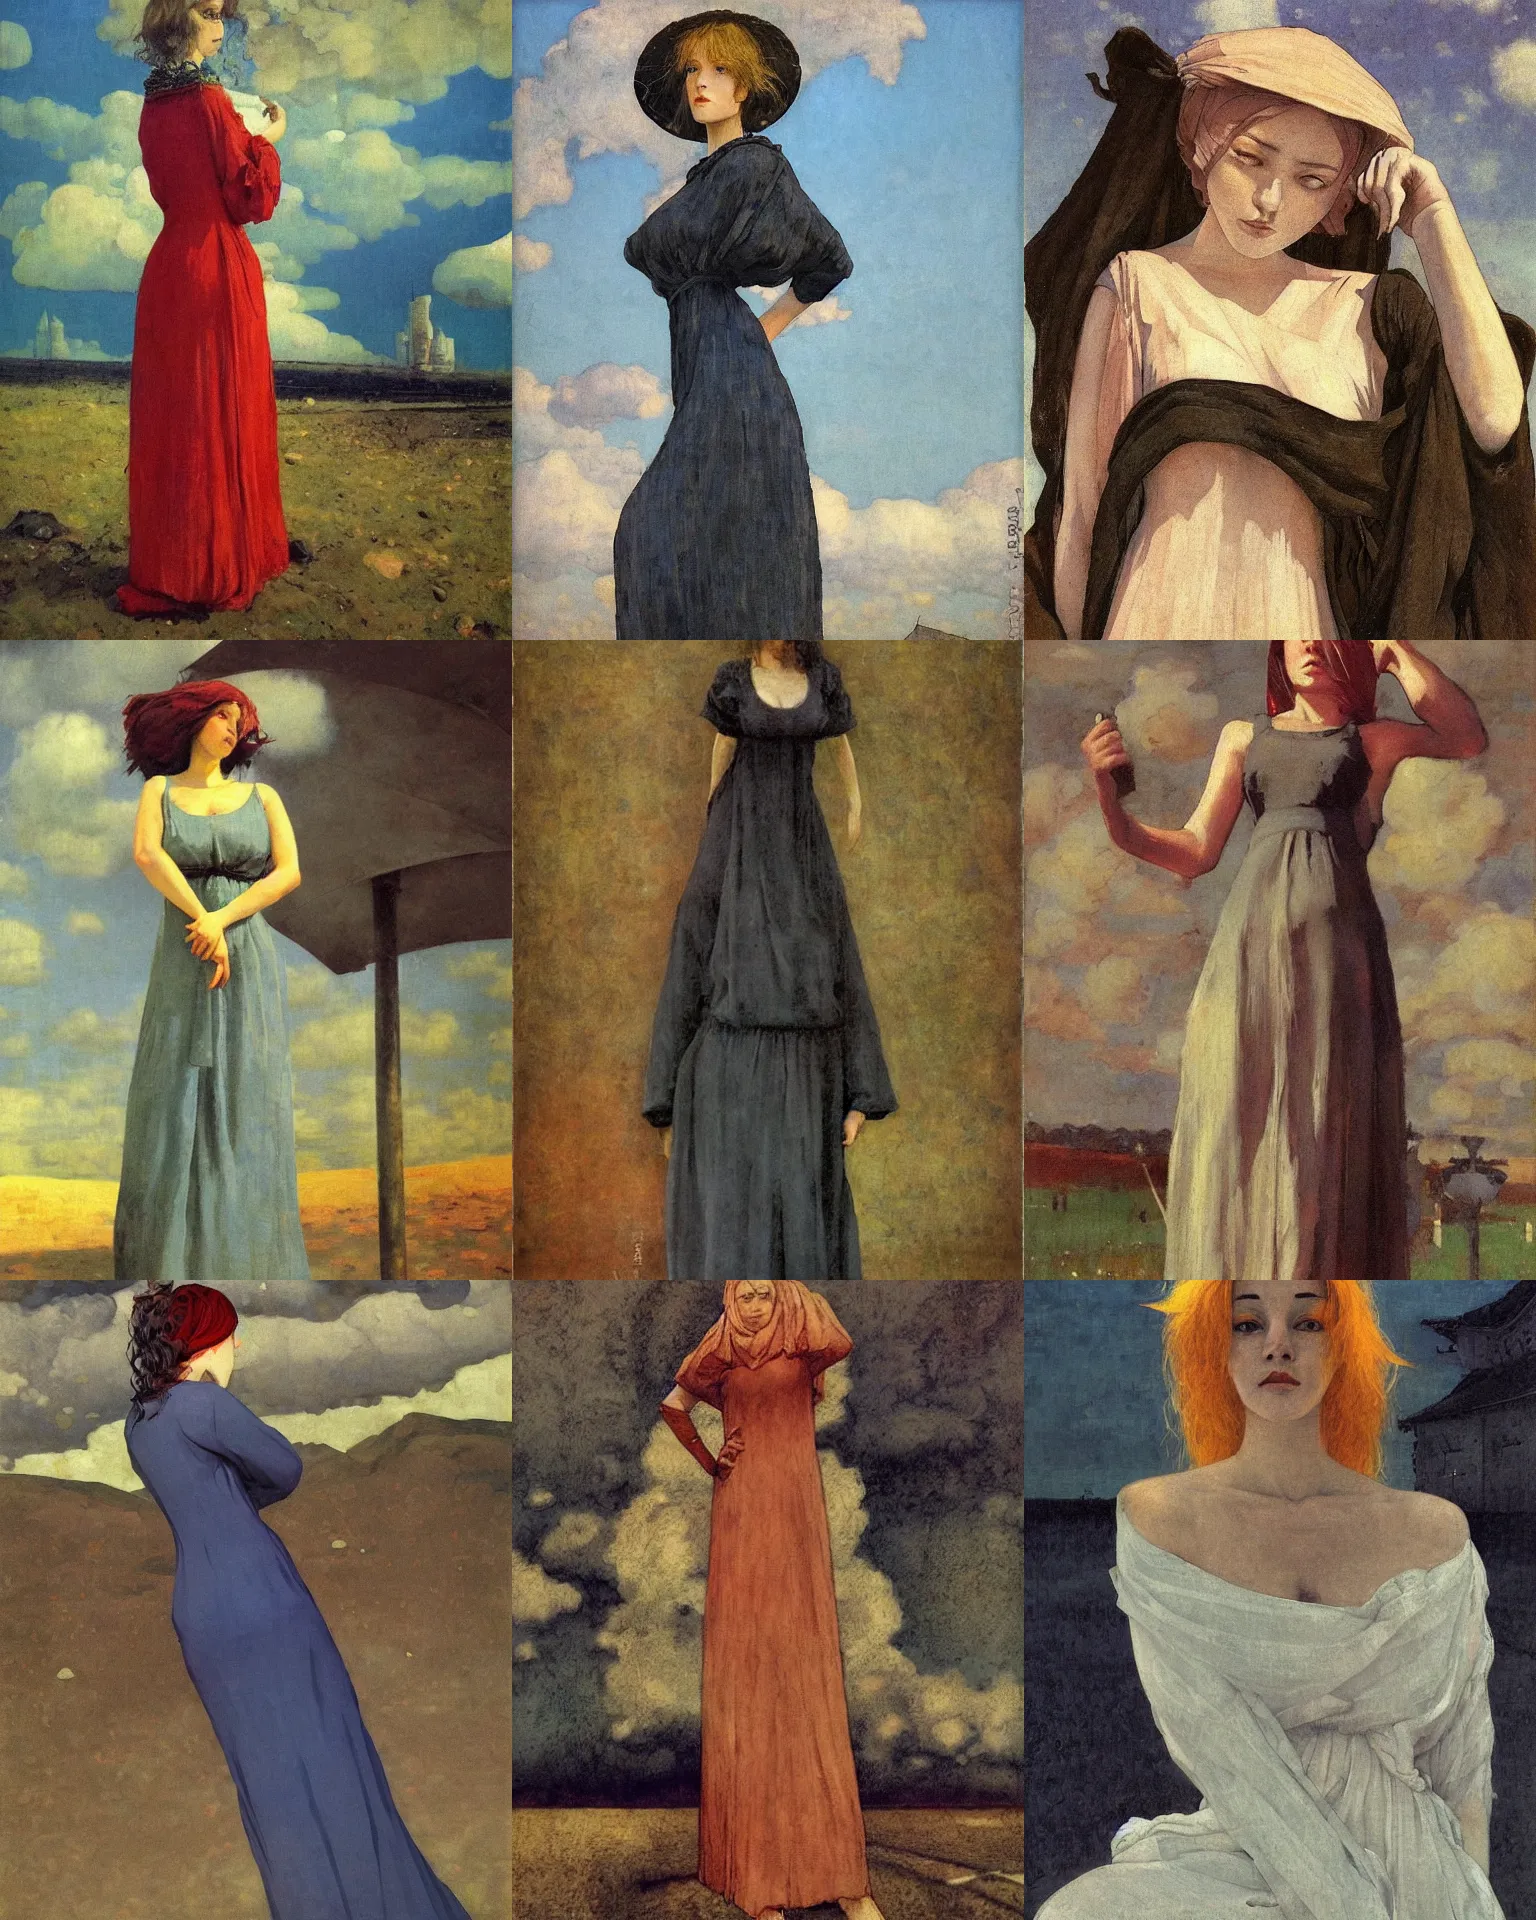 Prompt: woman portrait, female figure in maxi dress, sky, thunder clouds modernism, low poly, low poly, low poly, industrial, soviet painting, social realism, barocco, ilya repin style, john bauer style, anime,